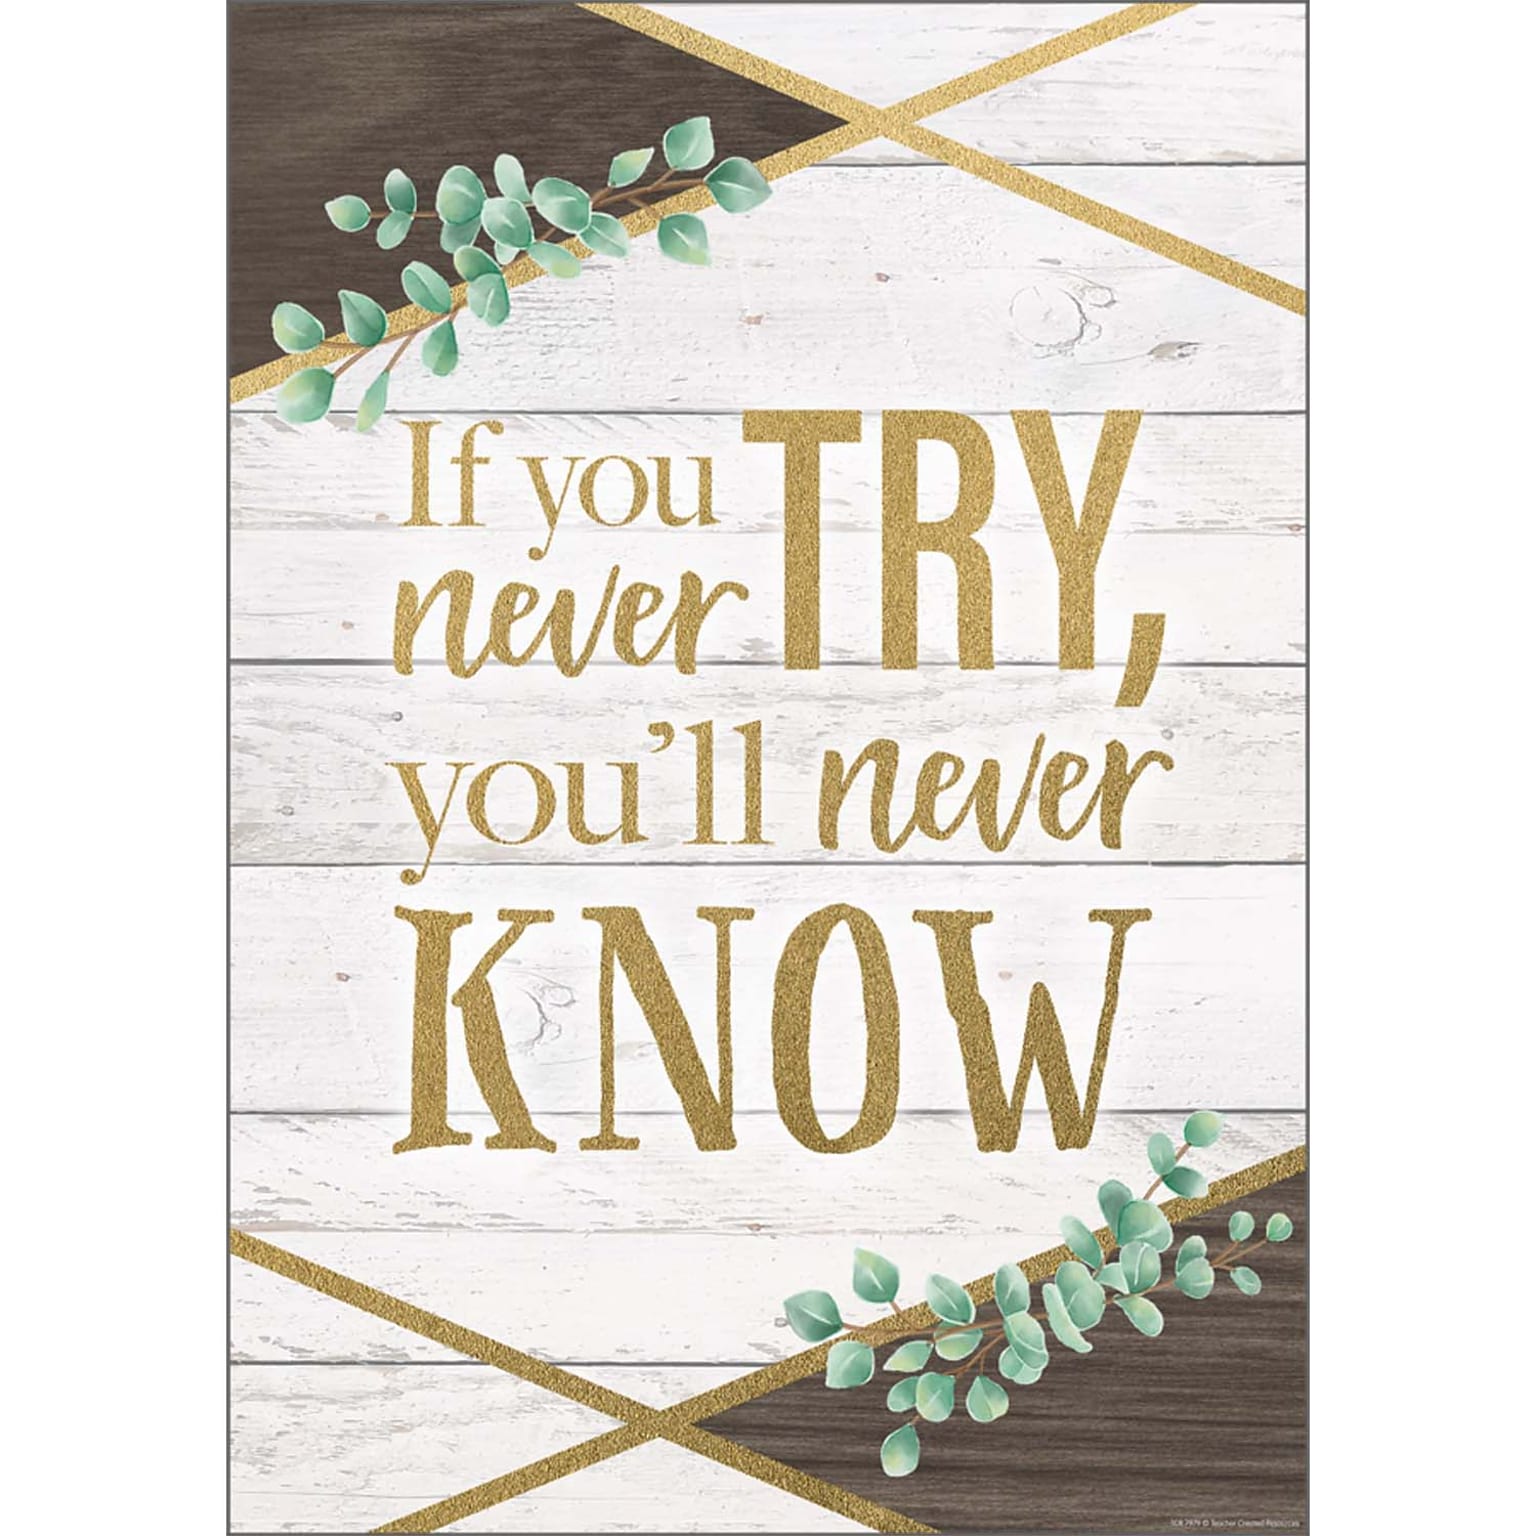 Teacher Created Resources® 13-3/8 x 19 If You Never Try, Youll Never Know Positive Poster (TCR7979)